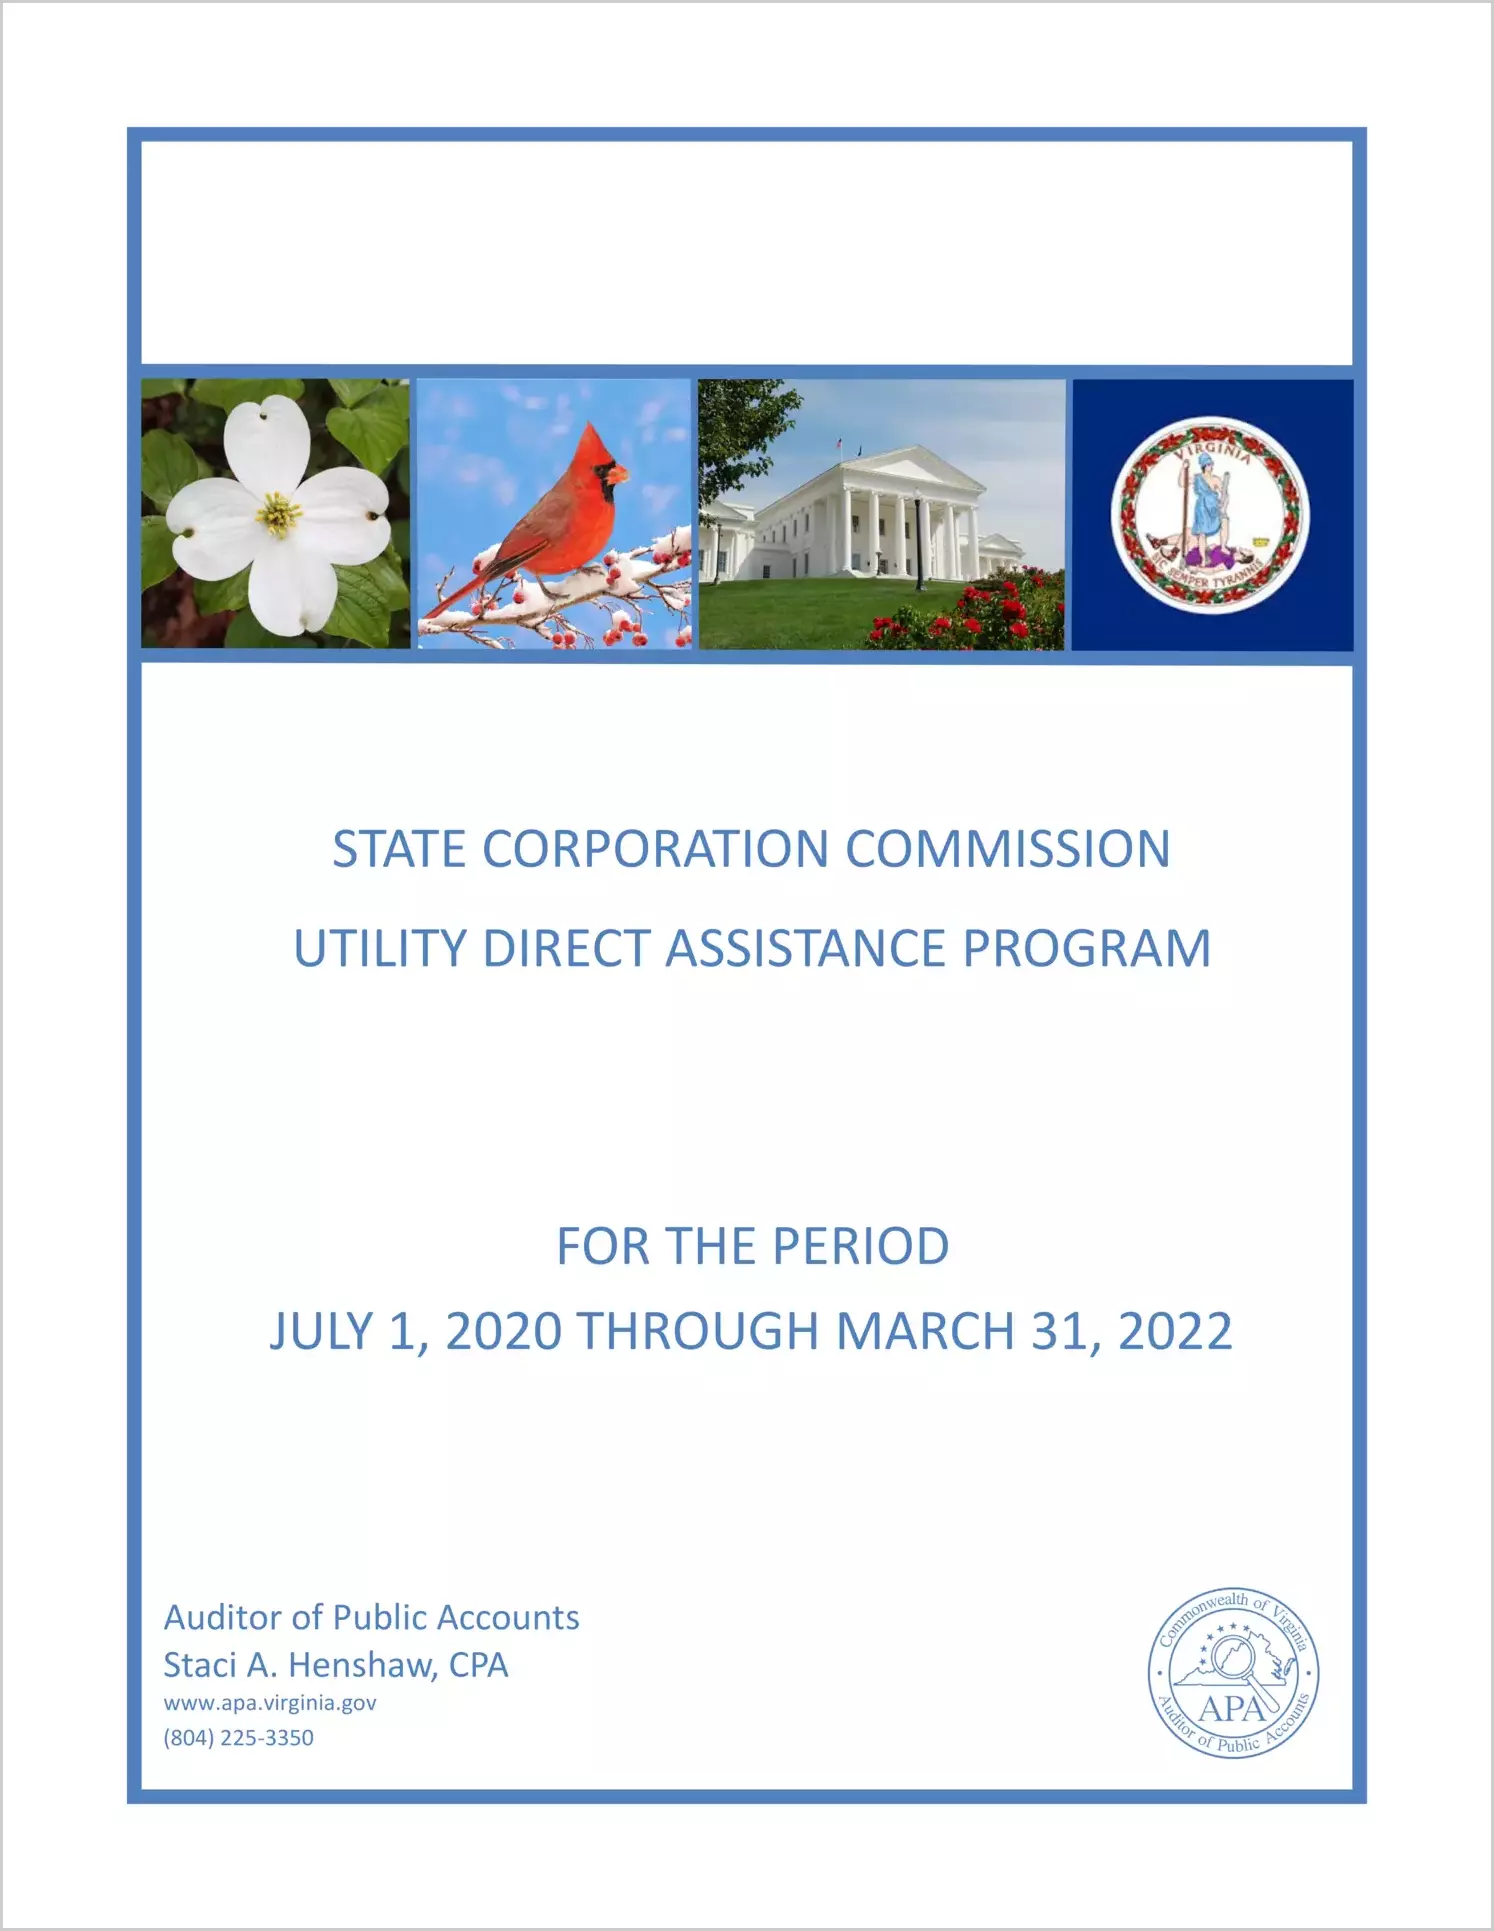 State Corporation Commission Utility Direct Assistance Program for the period July 1, 2020, through March 31, 2022